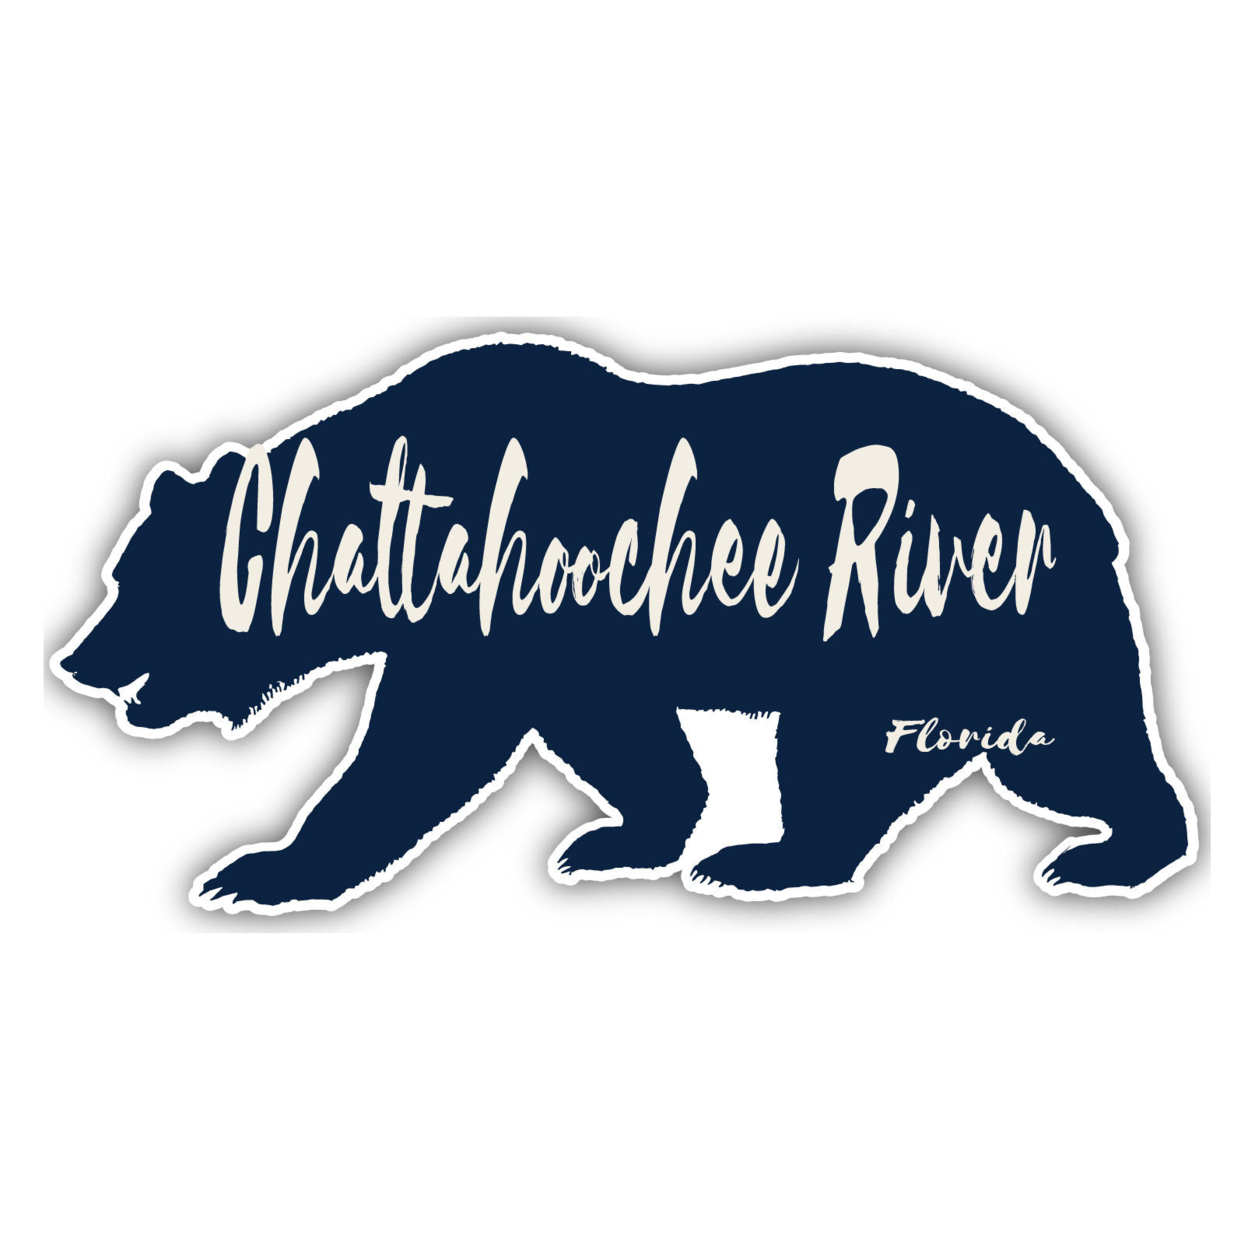 Chattahoochee River Florida Souvenir Decorative Stickers (Choose Theme And Size) - 4-Pack, 2-Inch, Bear